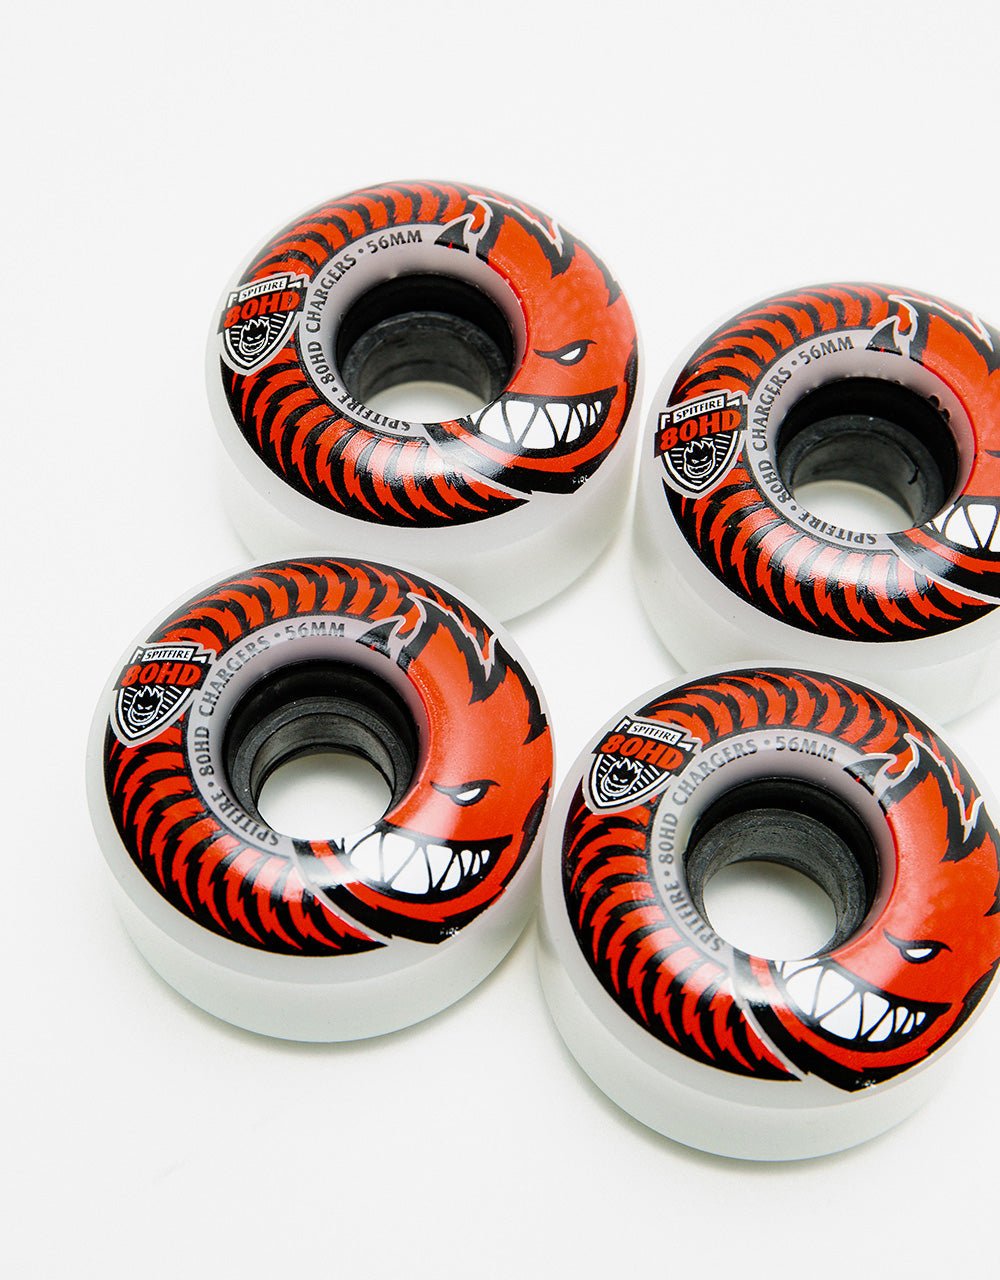 Spitfire Chargers Classic 80HD Skateboard Wheels